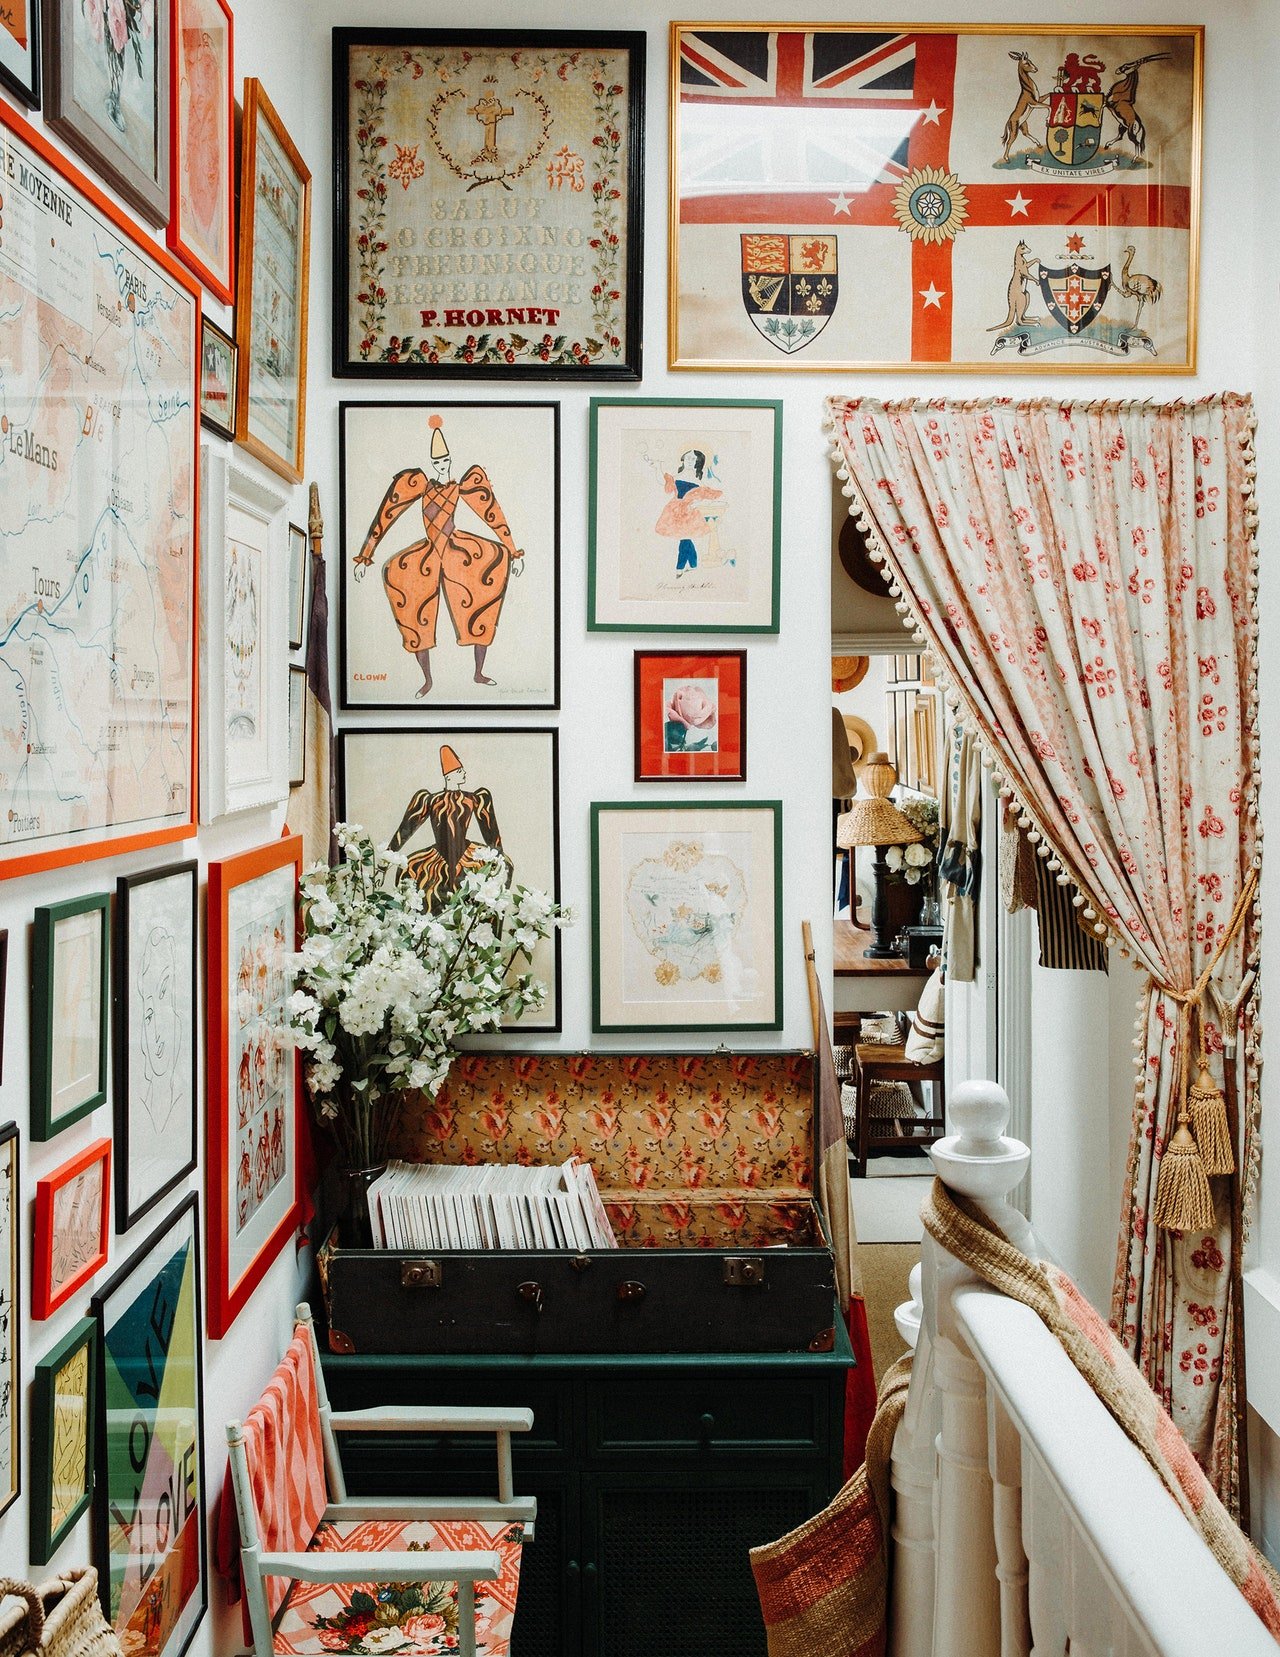    Maximalist, space, small space, doesn’t have to look messy, Designer, creative consultant,&nbsp;Violet Dent, pink, front room, stripes, flowers, petals, frames, gallery wall, big beautiful window, vintage dining table, framed art, lamp shades, kit